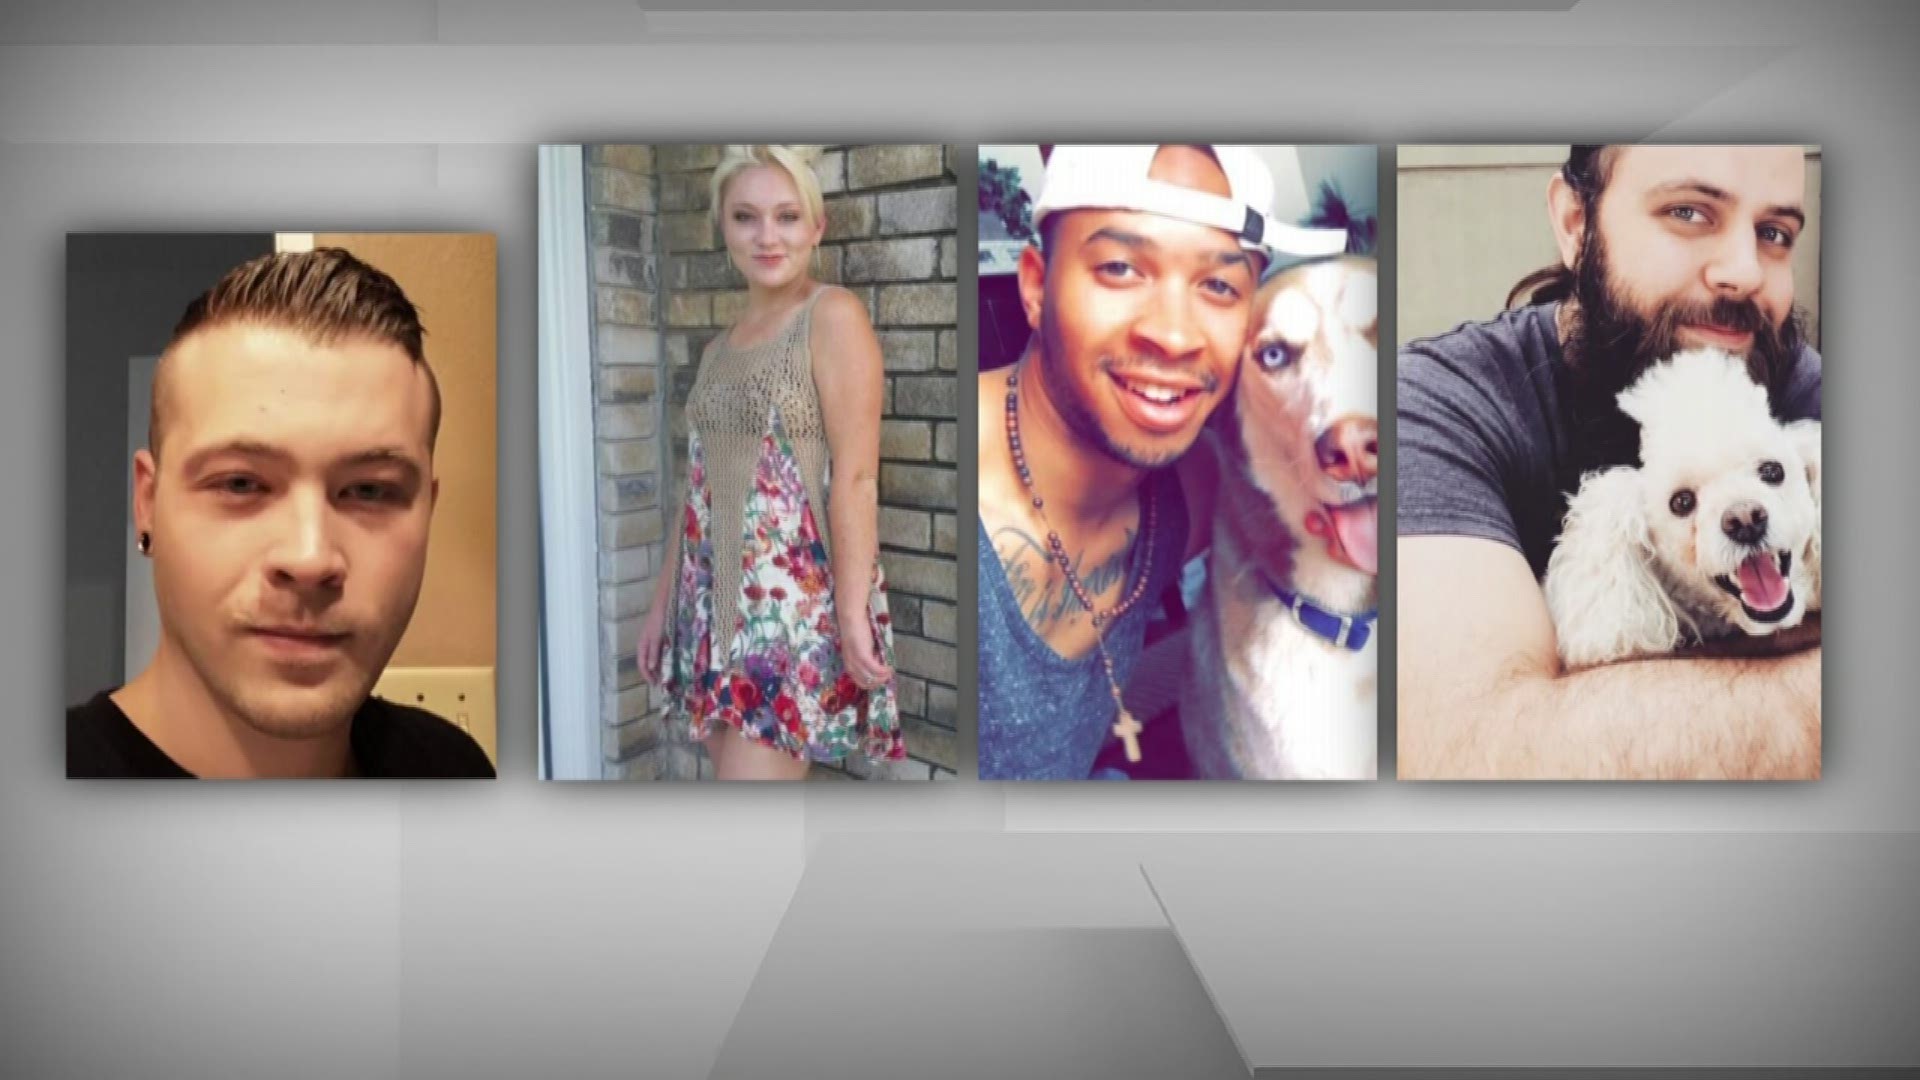 Plano shooting victims identified